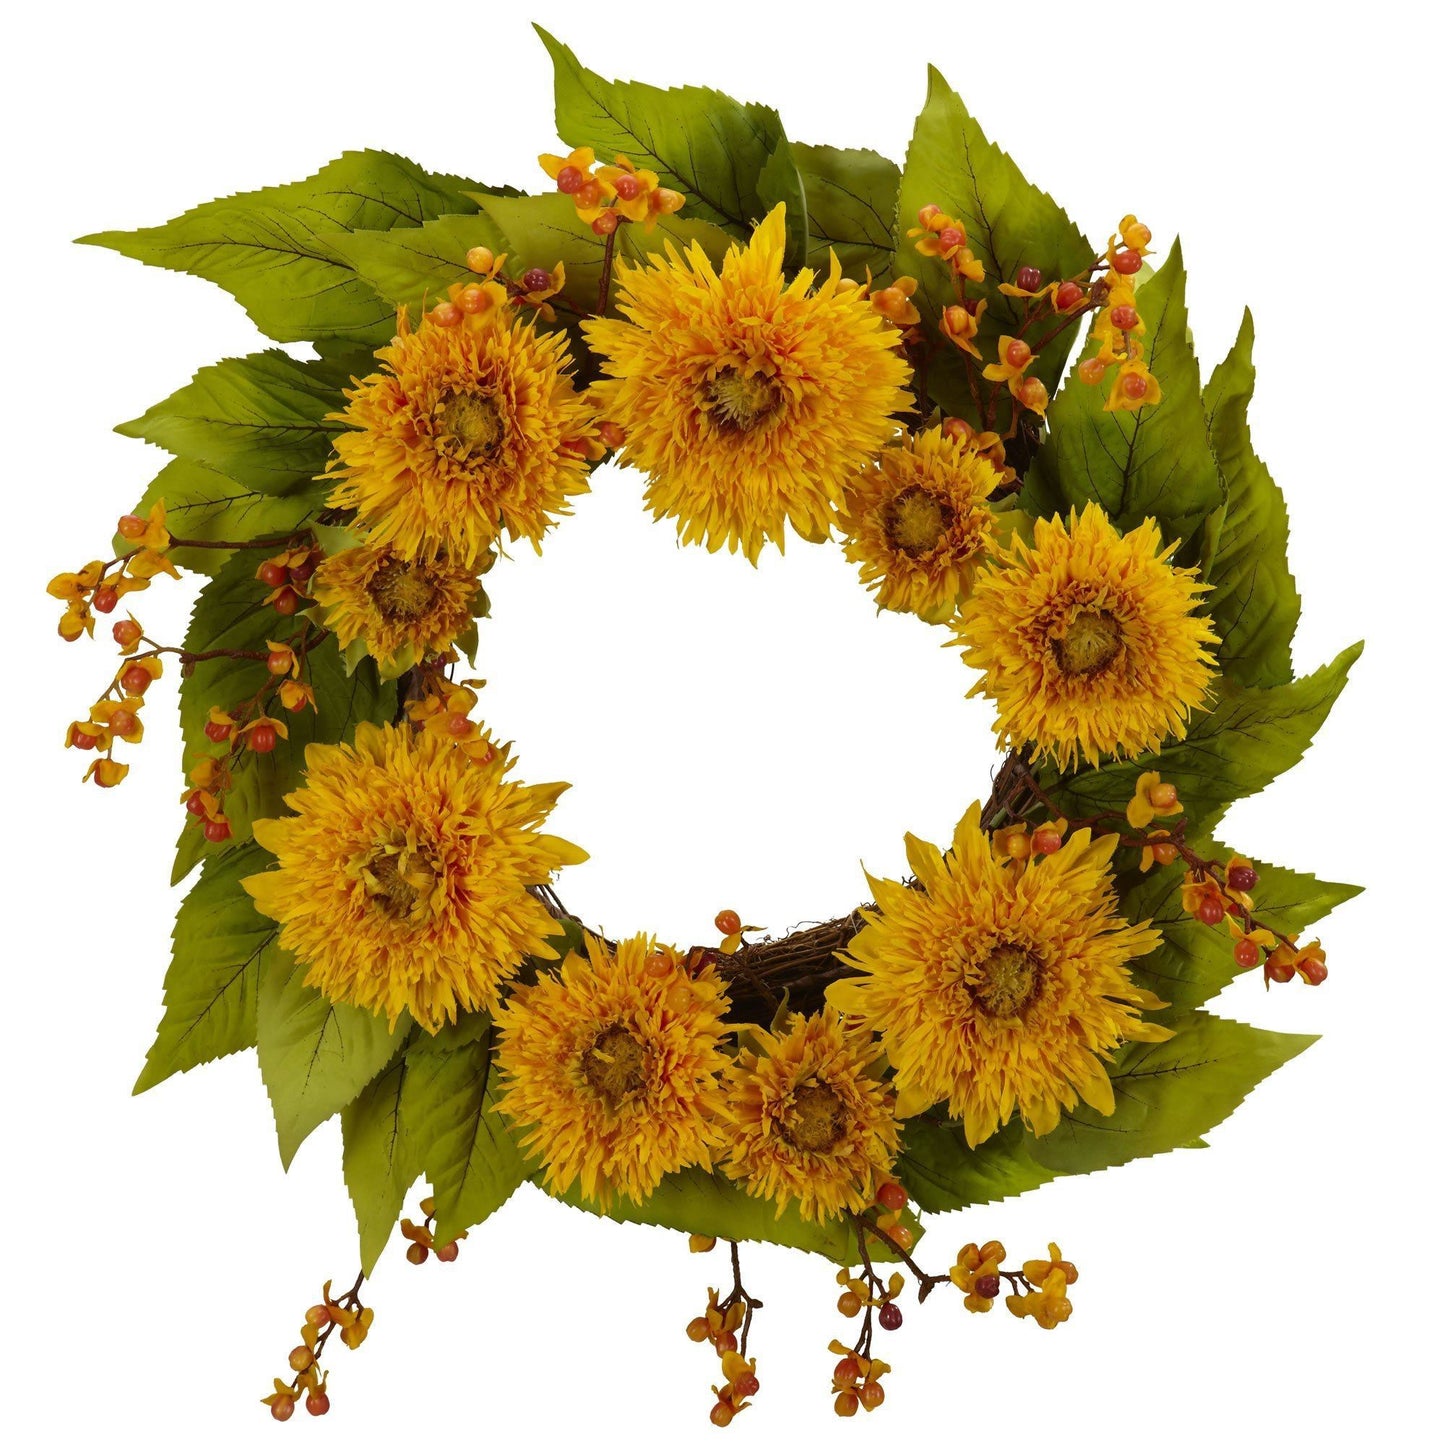 22" Golden Sunflower Wreath" by Nearly Natural